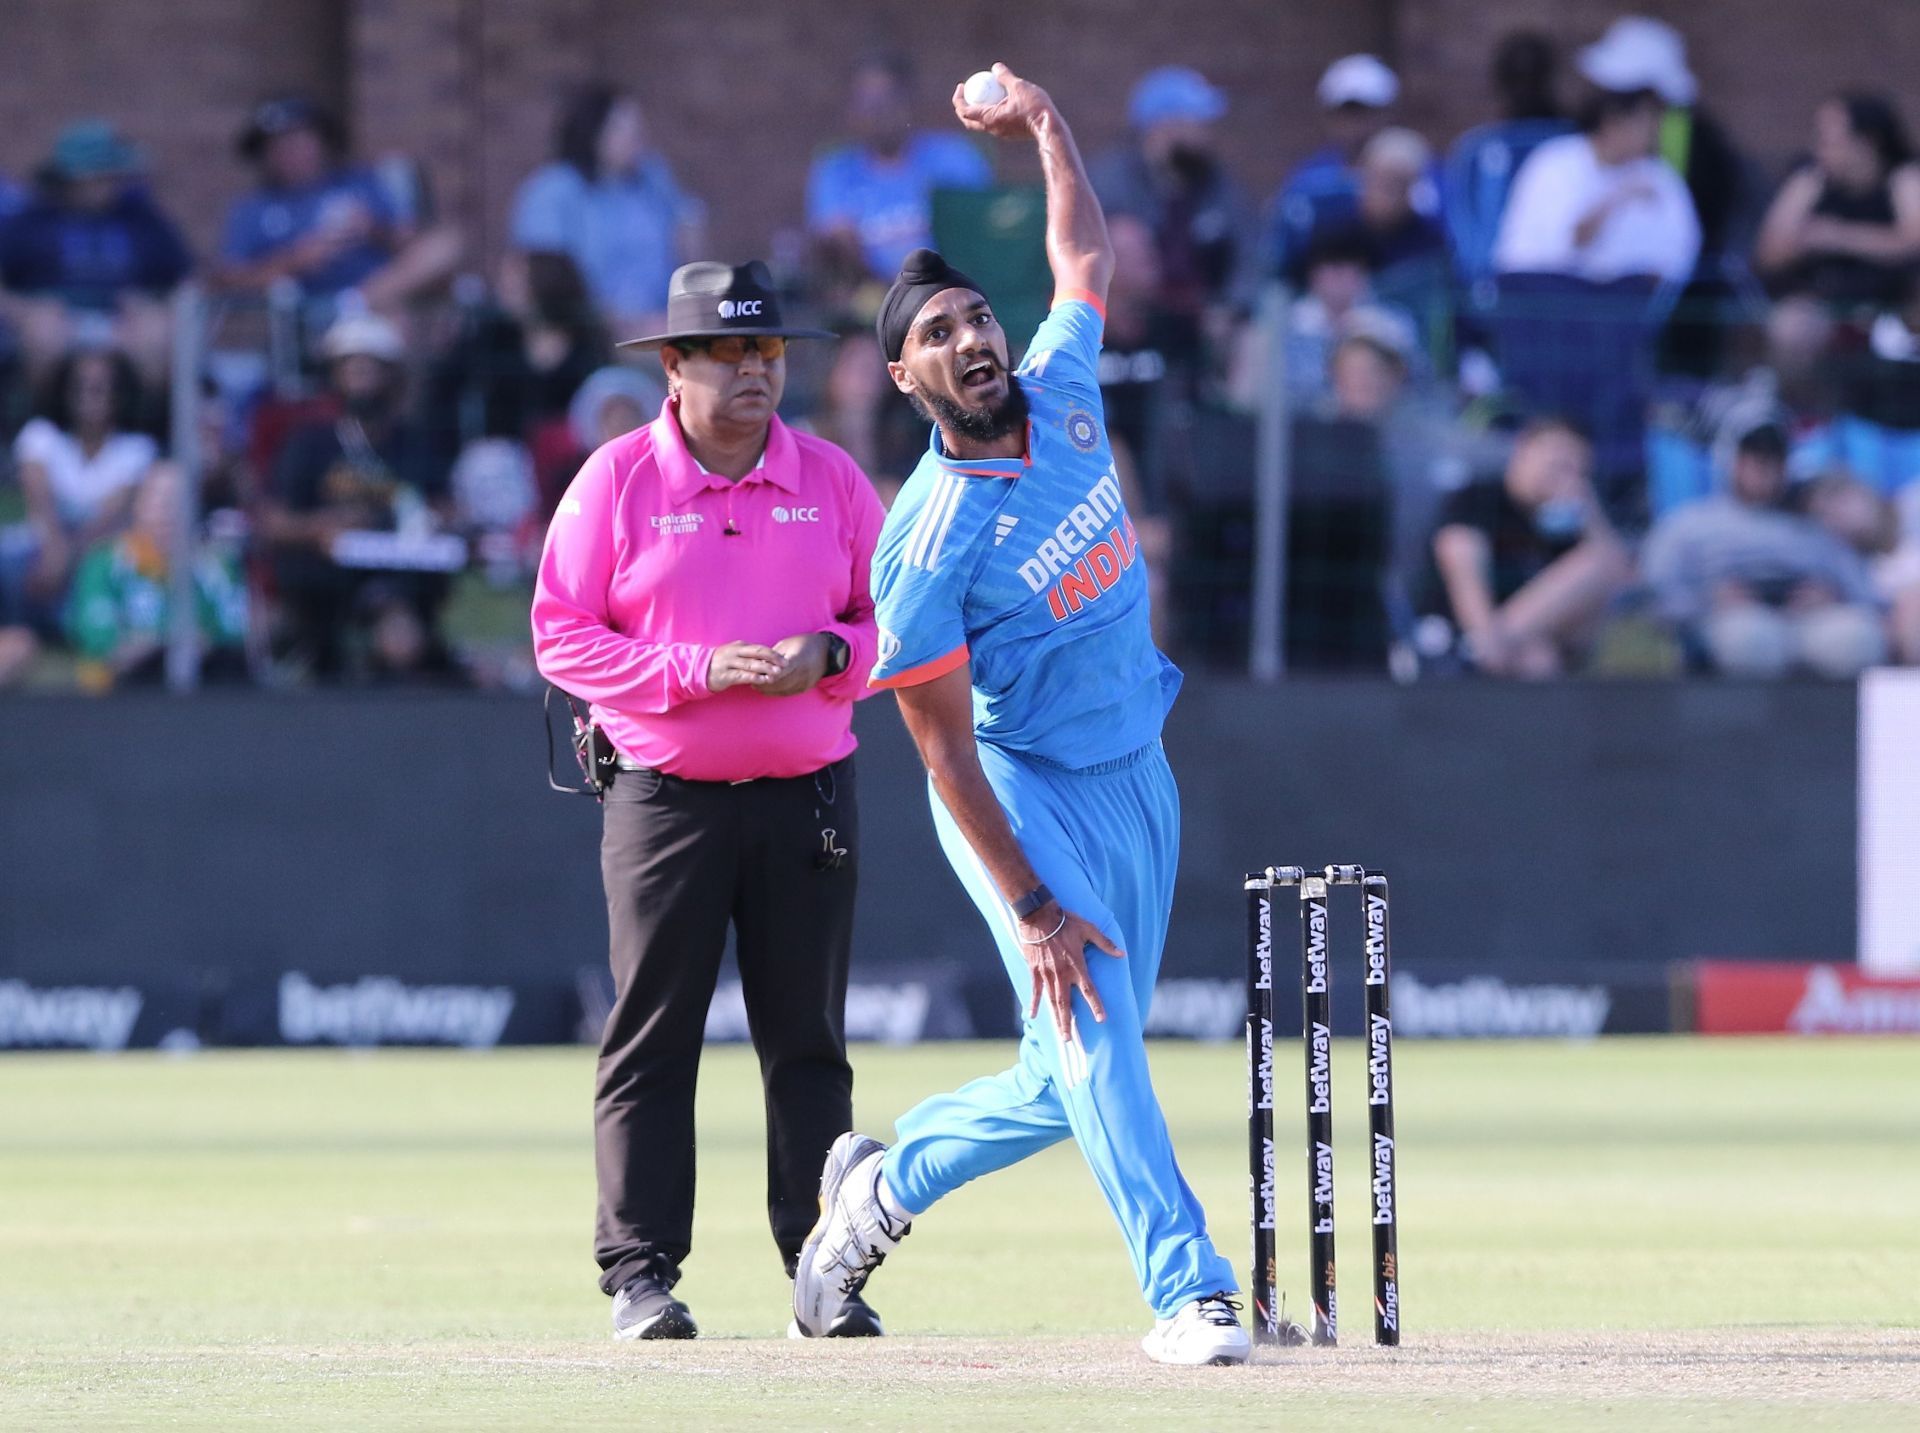 Arshdeep Singh has picked up 59 wickets in 42 T20Is. [P/C: Getty]